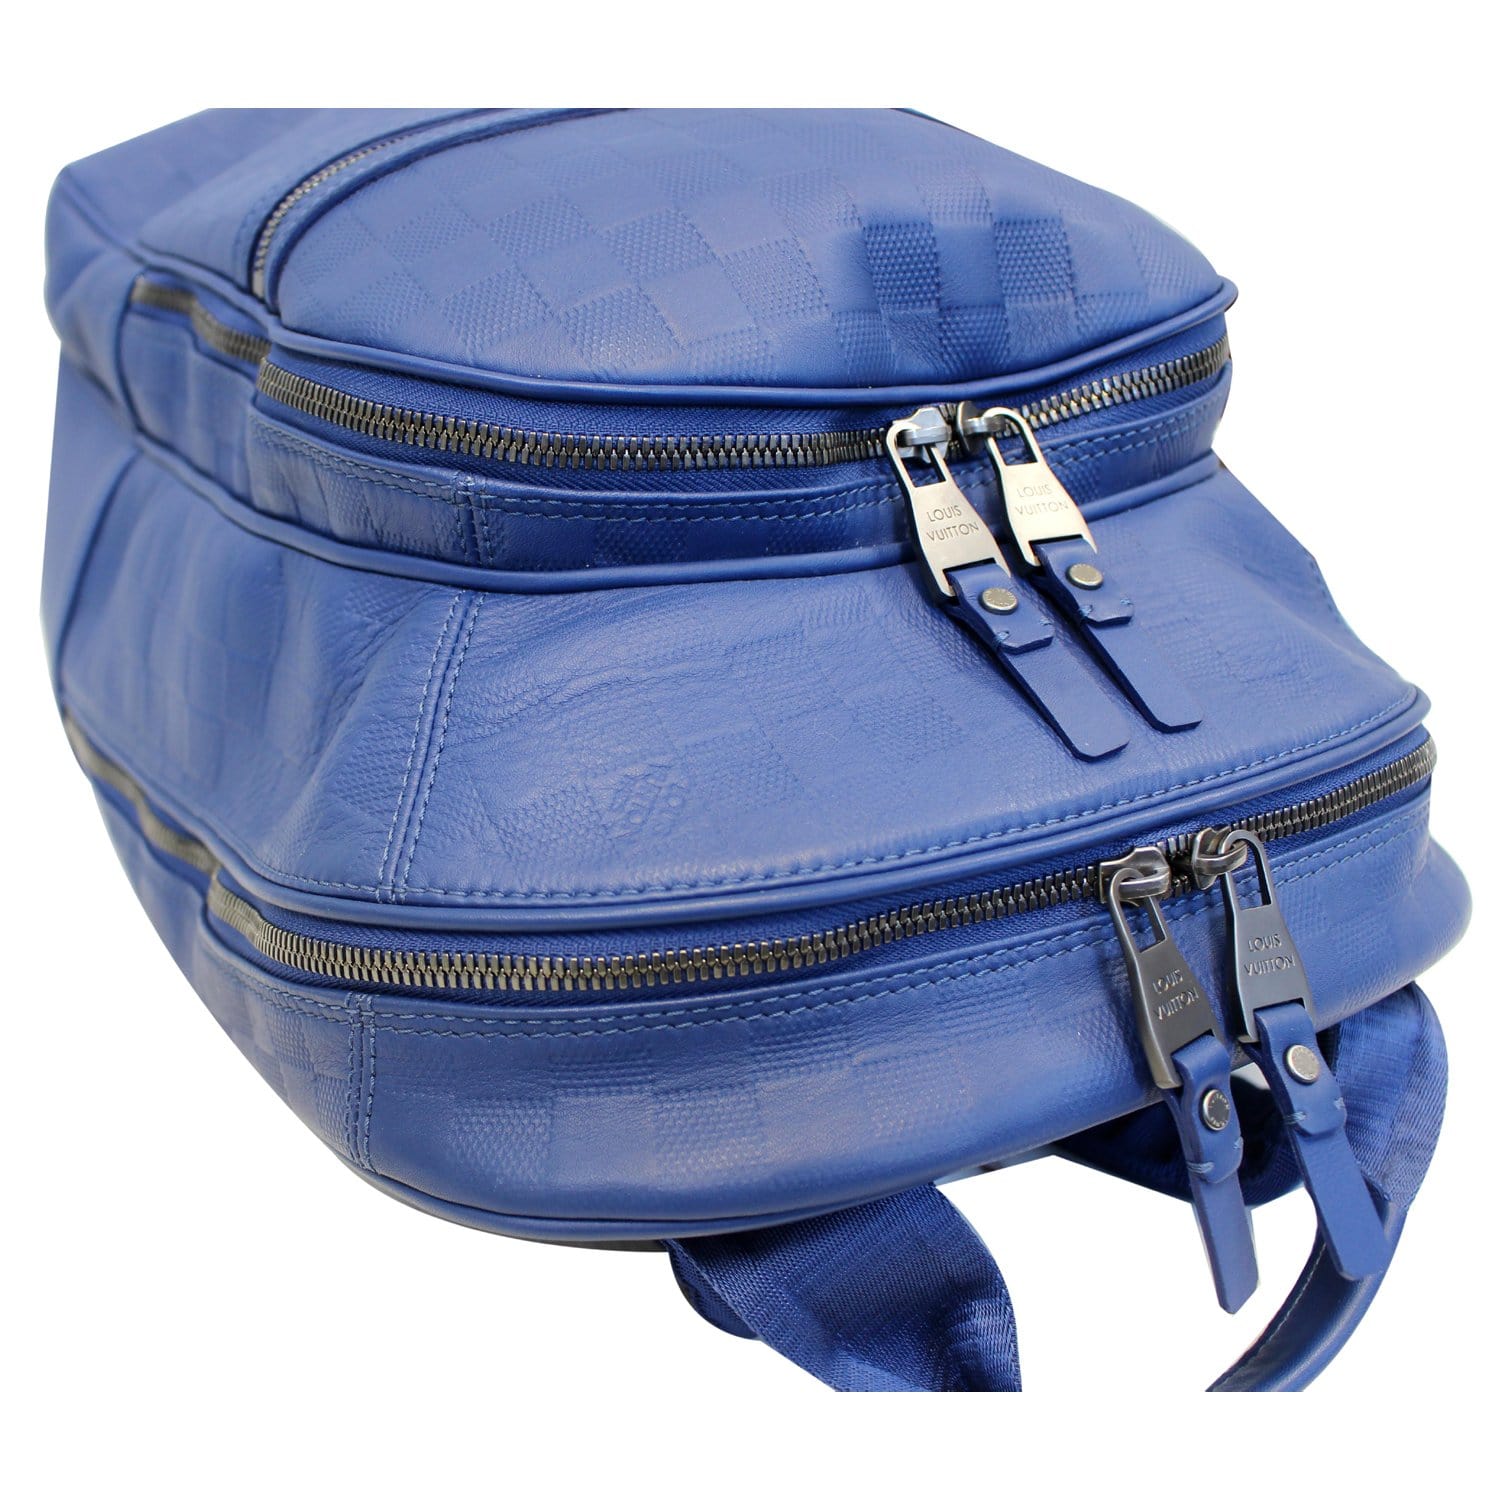 Michael backpack leather satchel Louis Vuitton Blue in Leather - 32718185